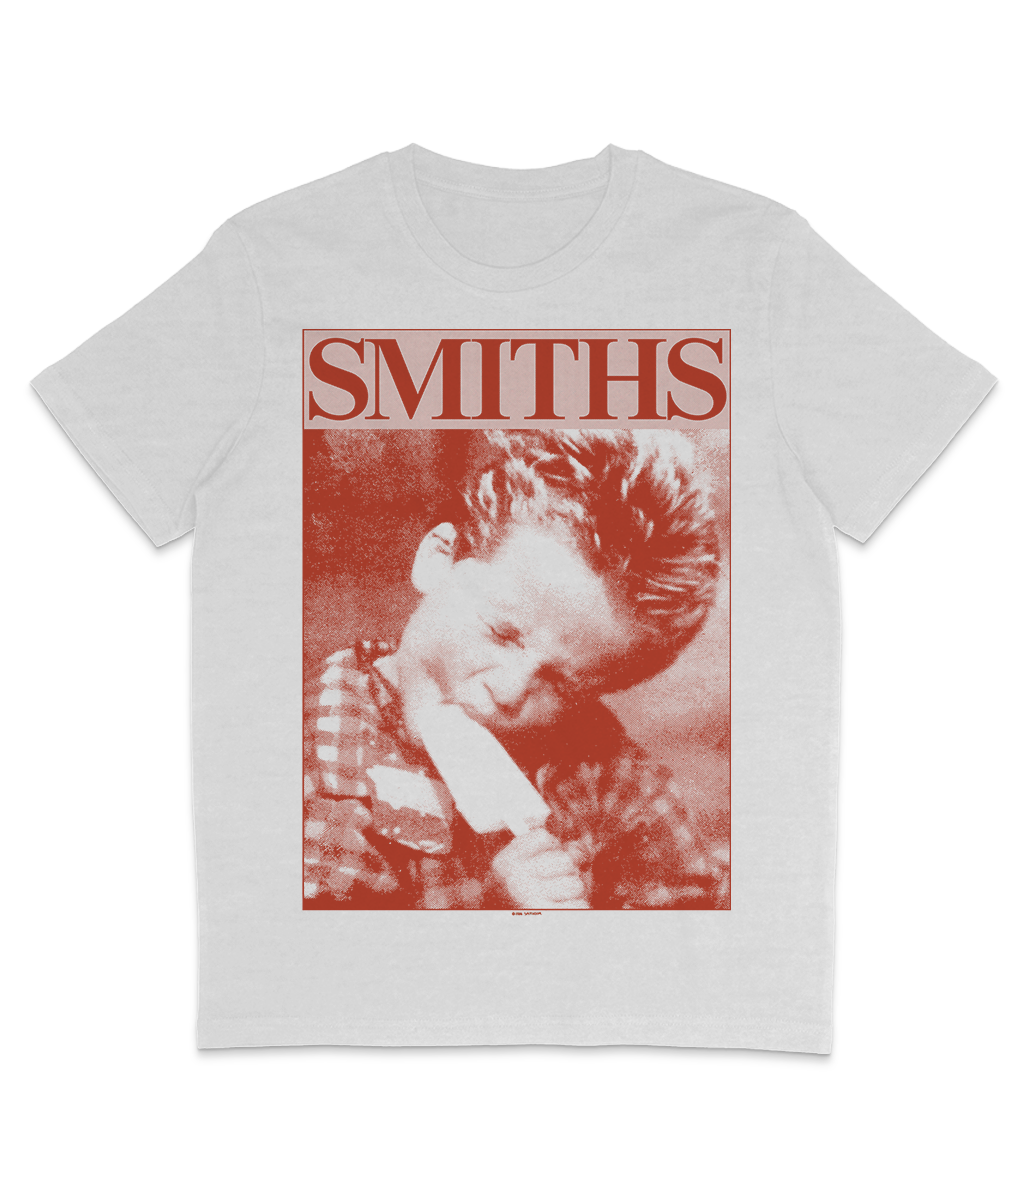 THE SMITHS - 'Boy With Lolly' - Smithdom - 1986